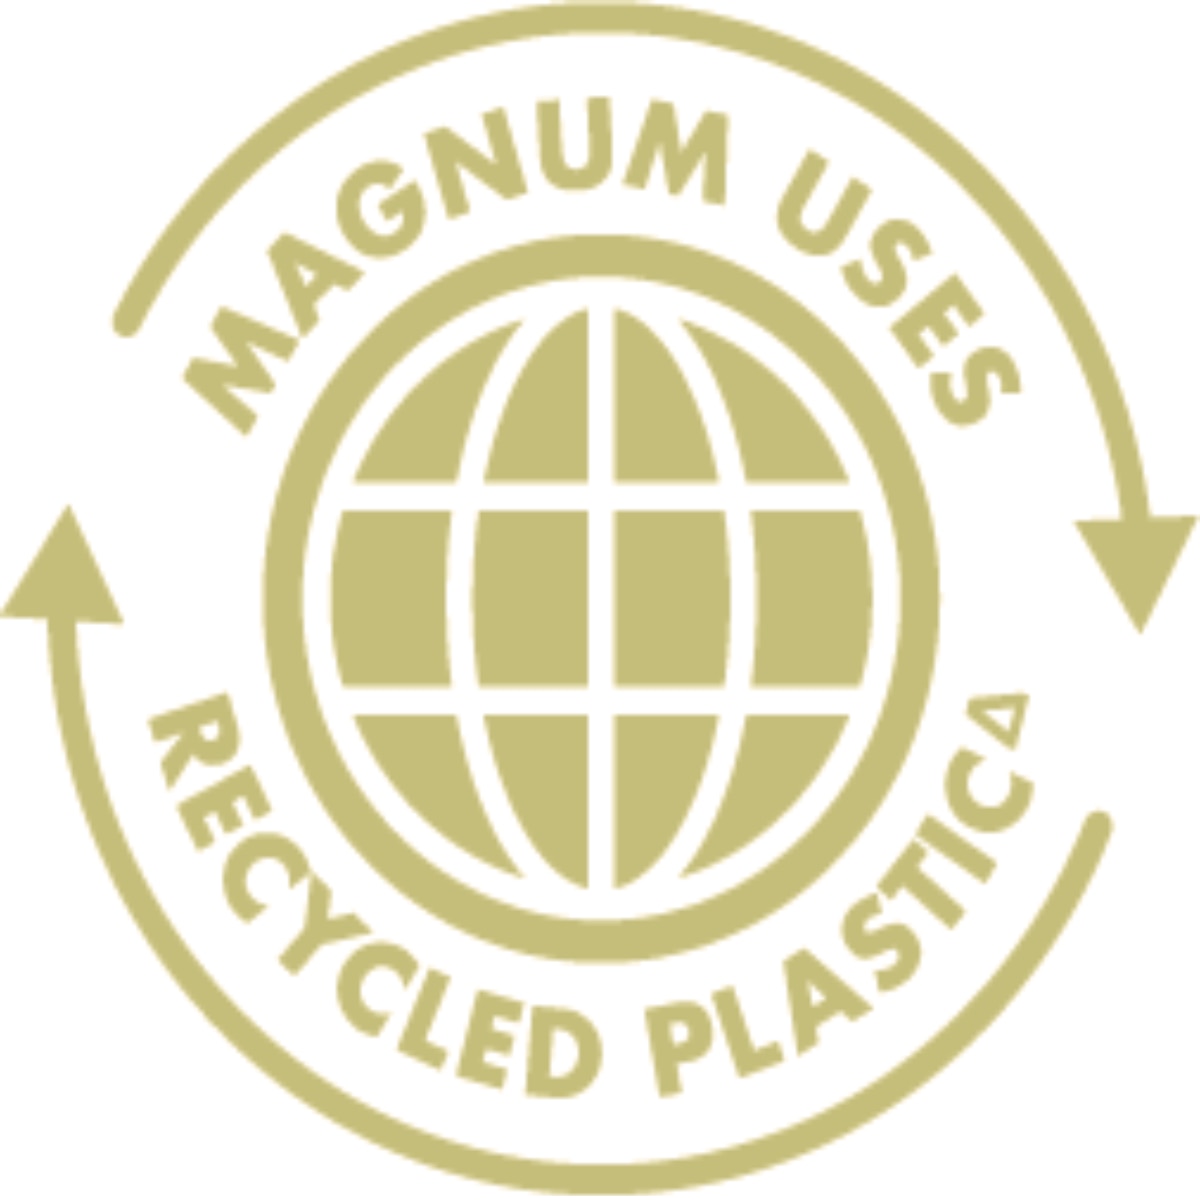 Magnum please recycle logo